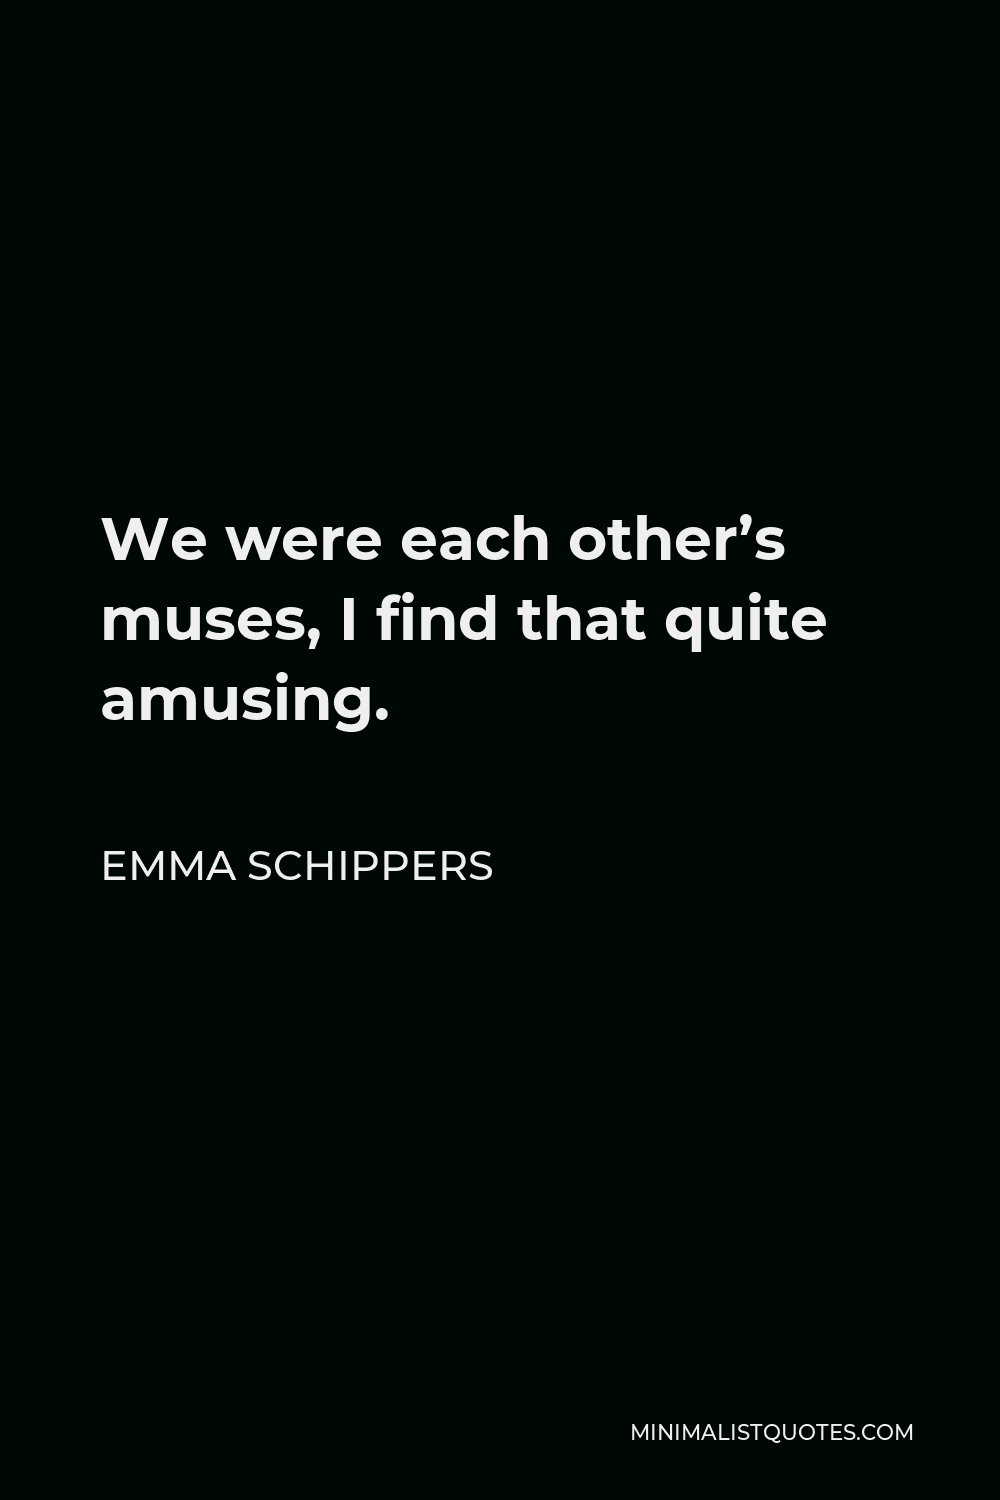 Emma Schippers Quote - We were each other’s muses, I find that quite amusing.